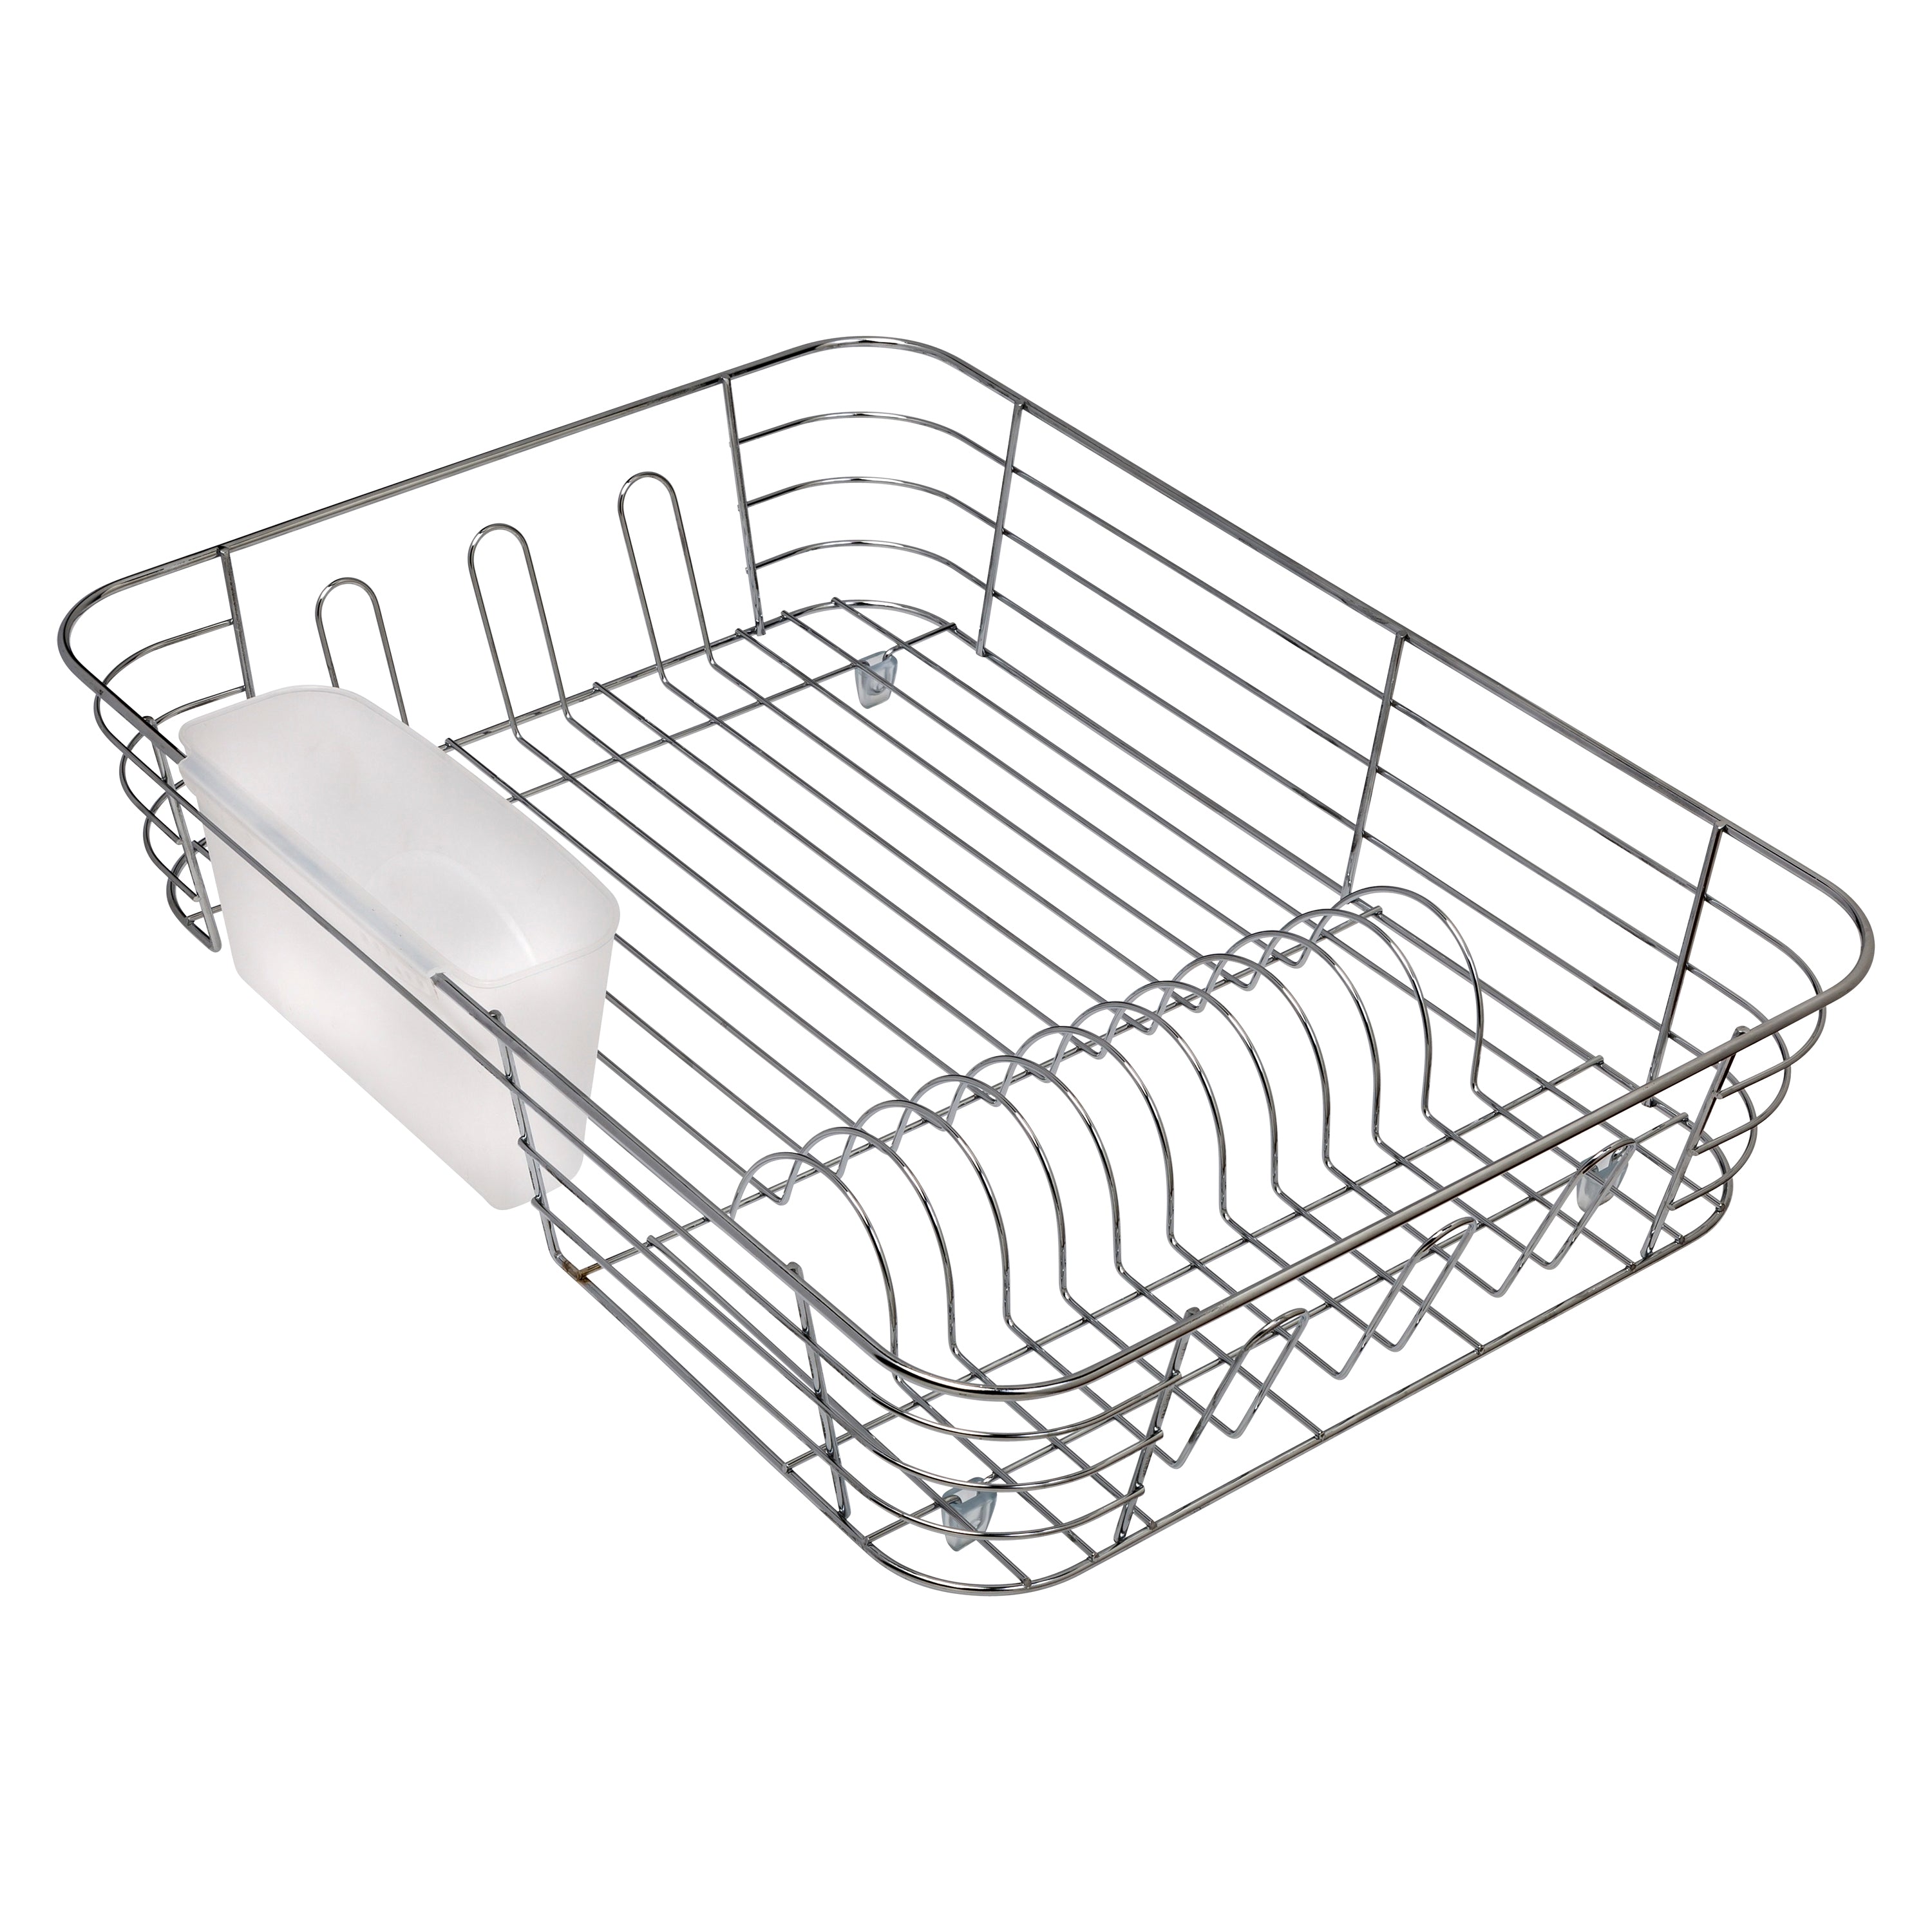 Extra Large Dish Drying Rack Chrome - ONLINE ONLY: Montclair State  University